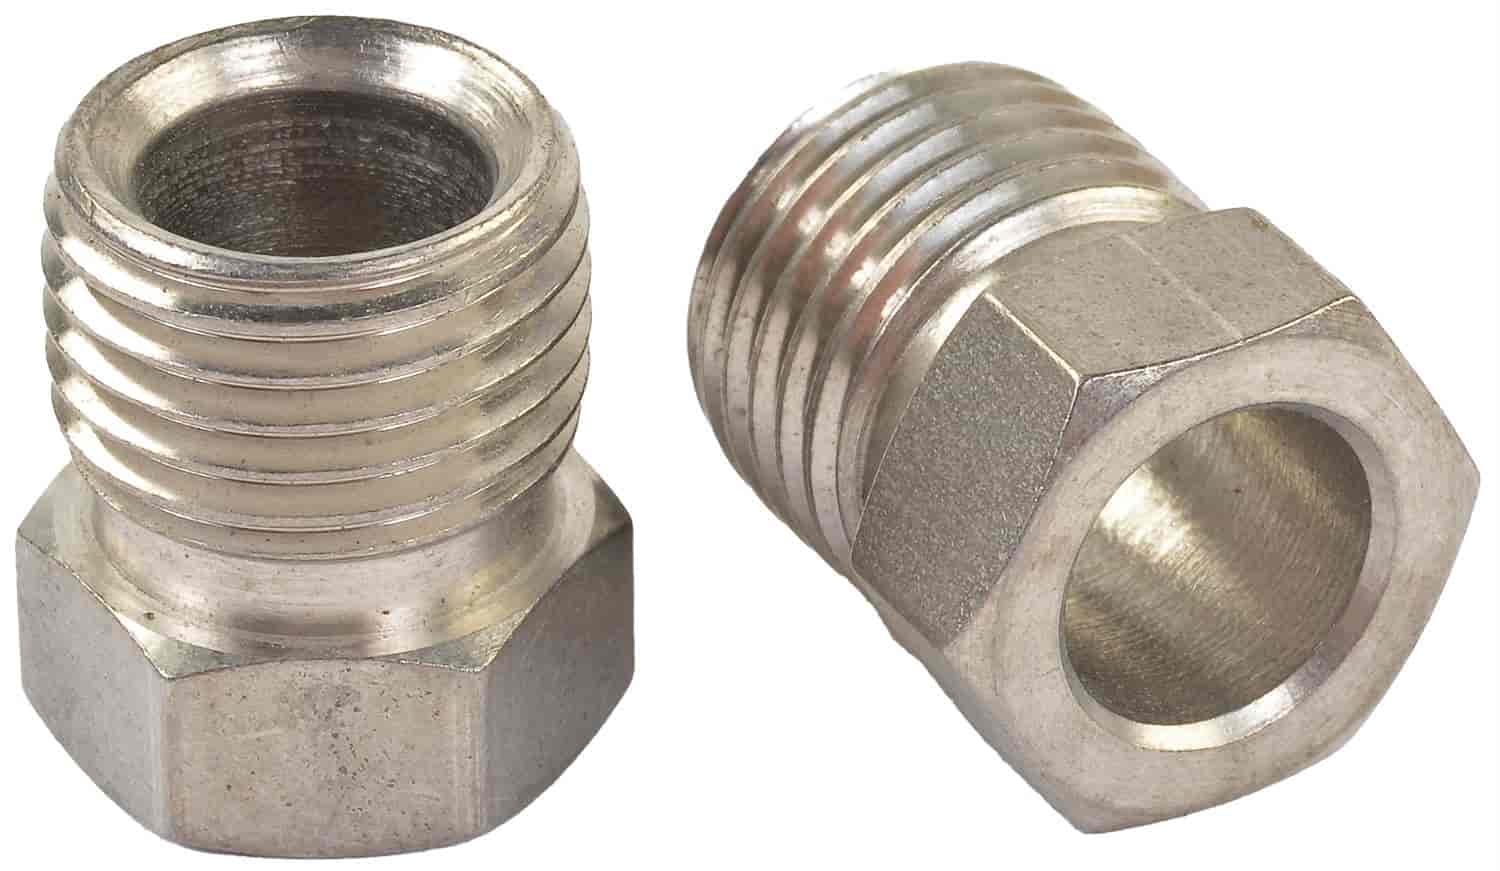 Stainless Steel Inverted Flare Tube Nuts for 5/16 in. Tubing [1/2 in.-20 Thread]